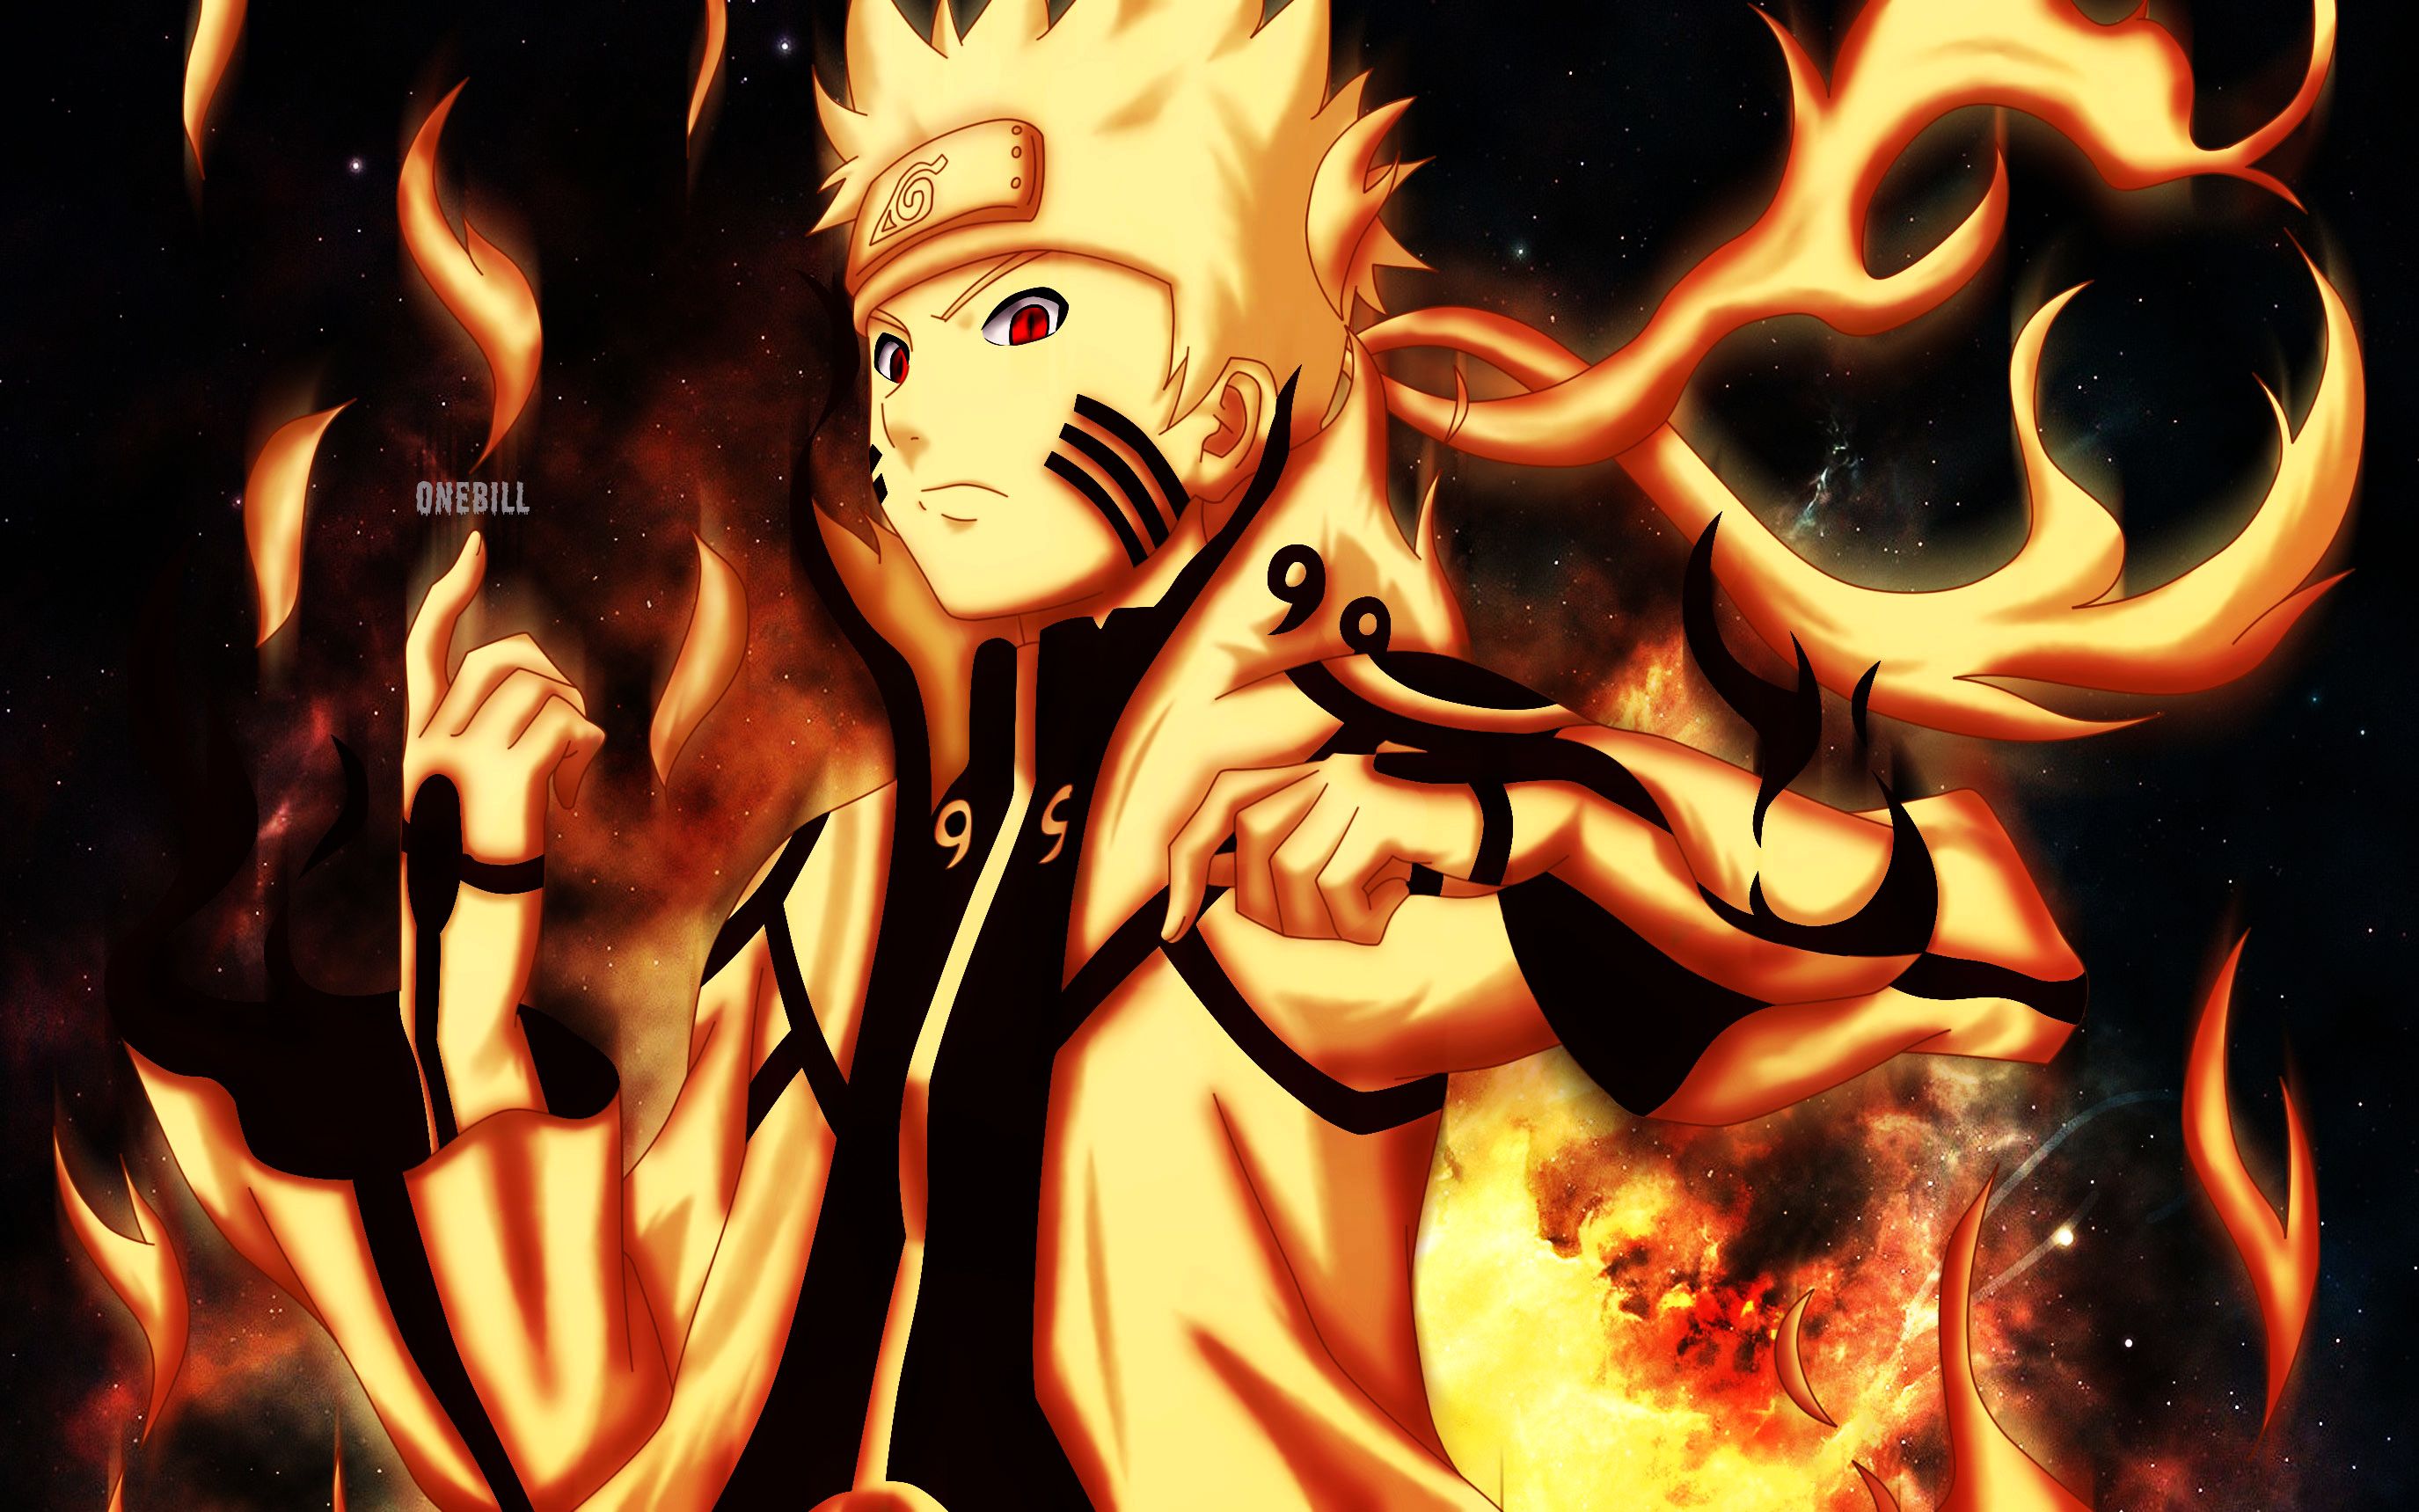 Best Naruto Wallpapers For Mobile Foto Gratis Posts Id